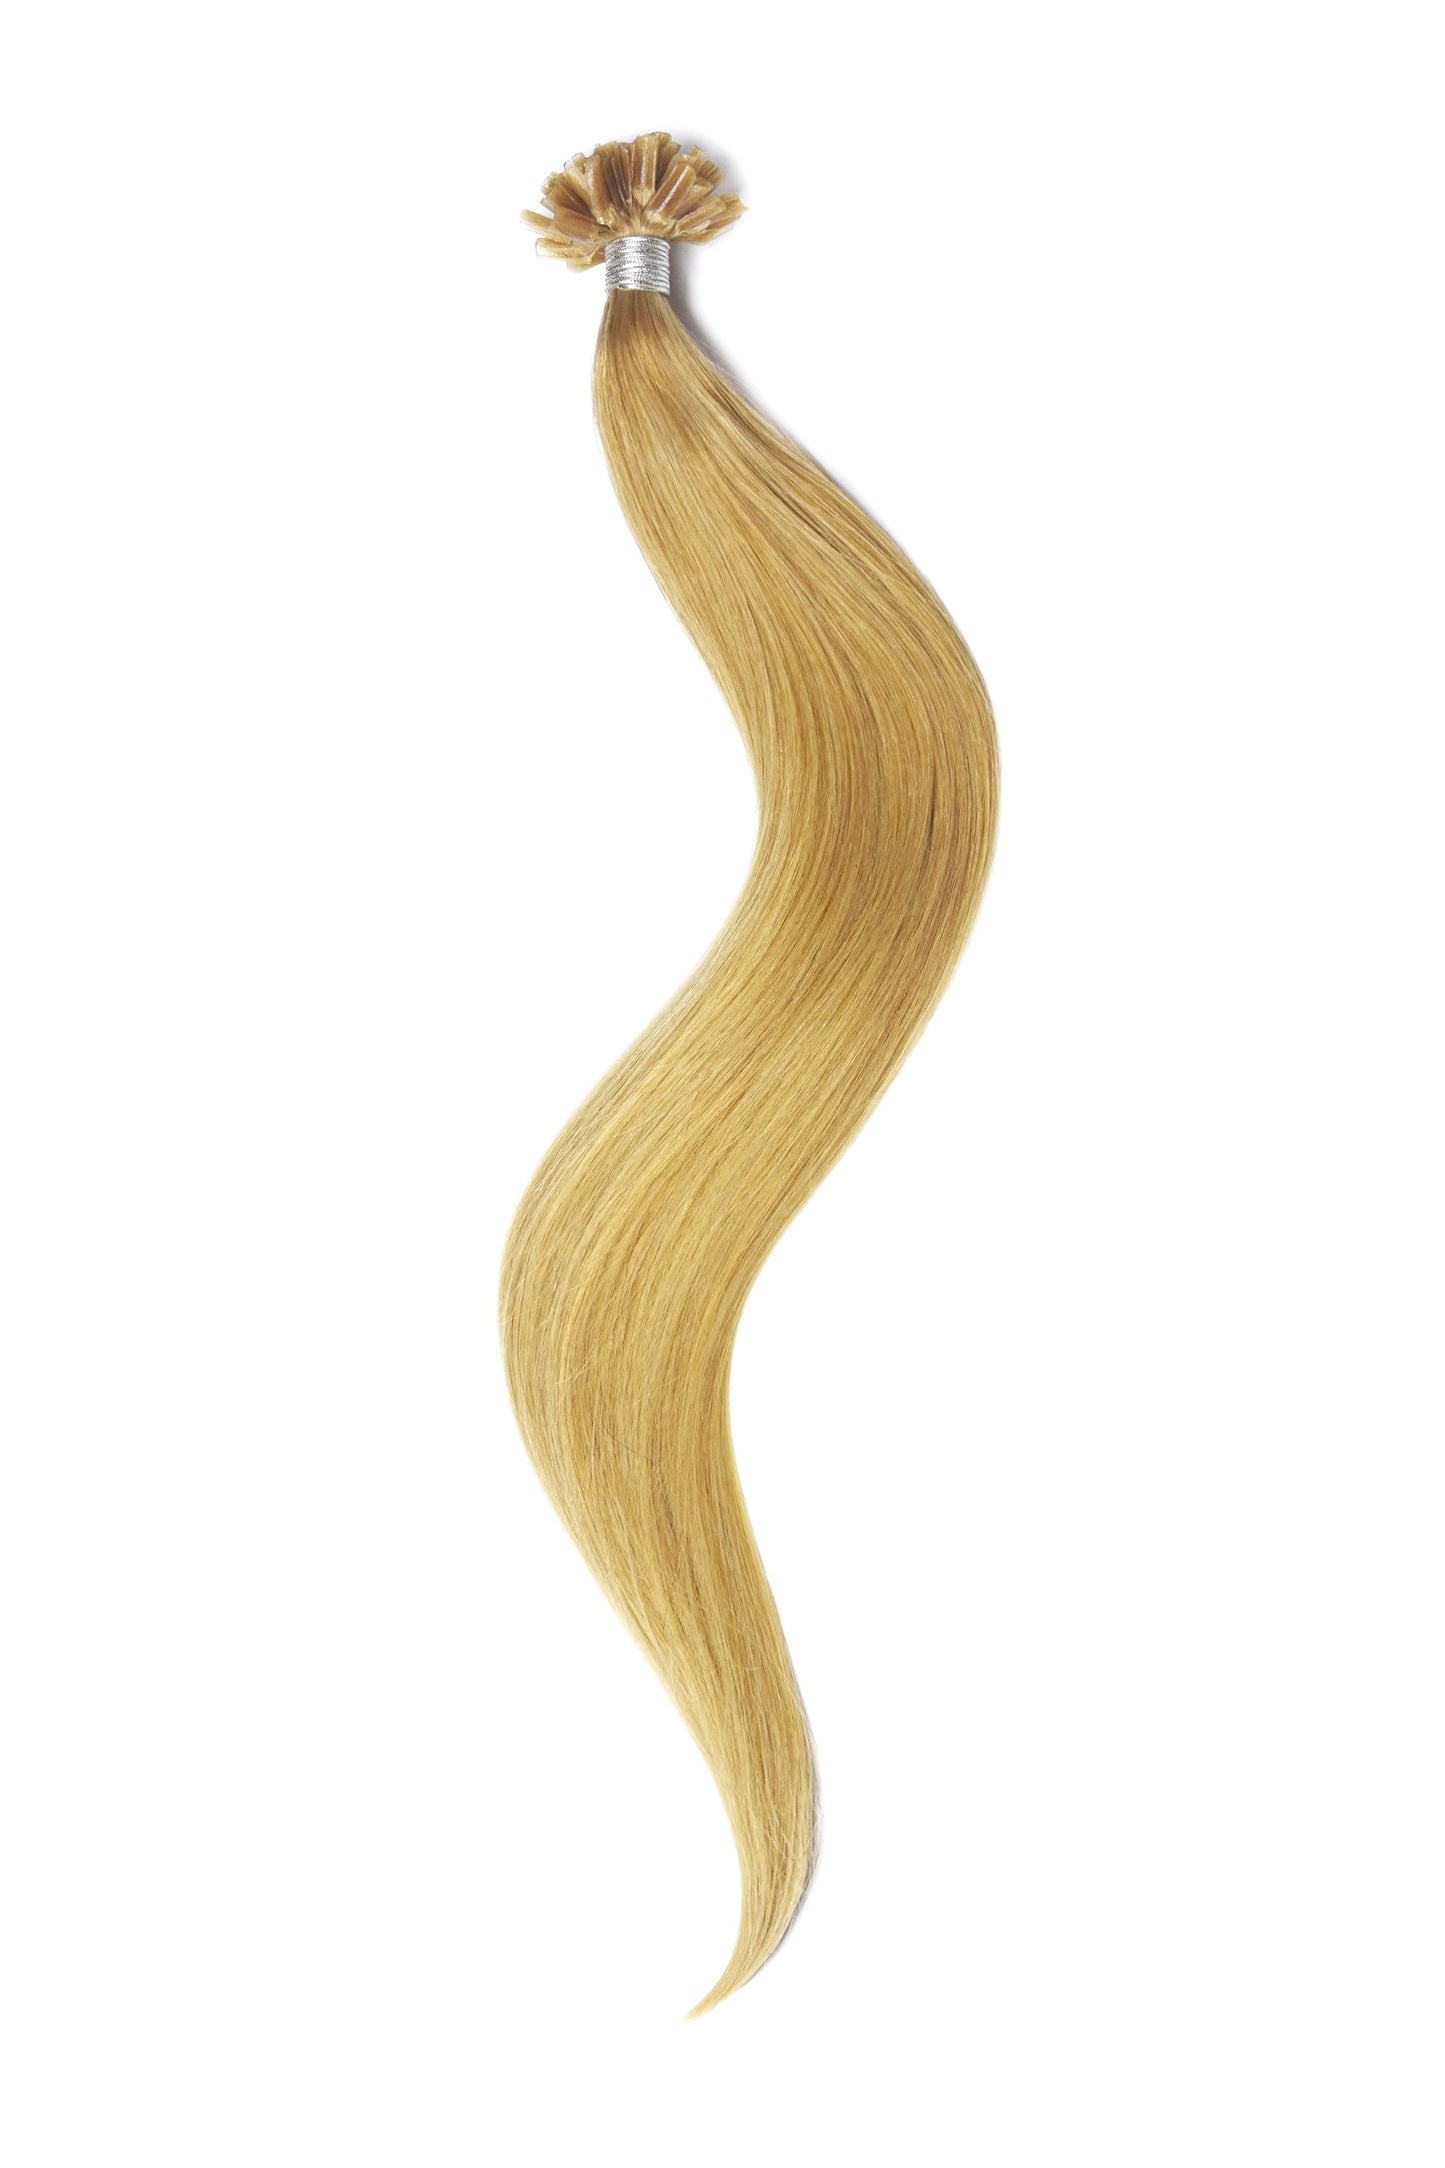 Nail Tip / U-Tip Pre-bonded Remy Human Hair Extensions - Light Golden Blonde (#16)